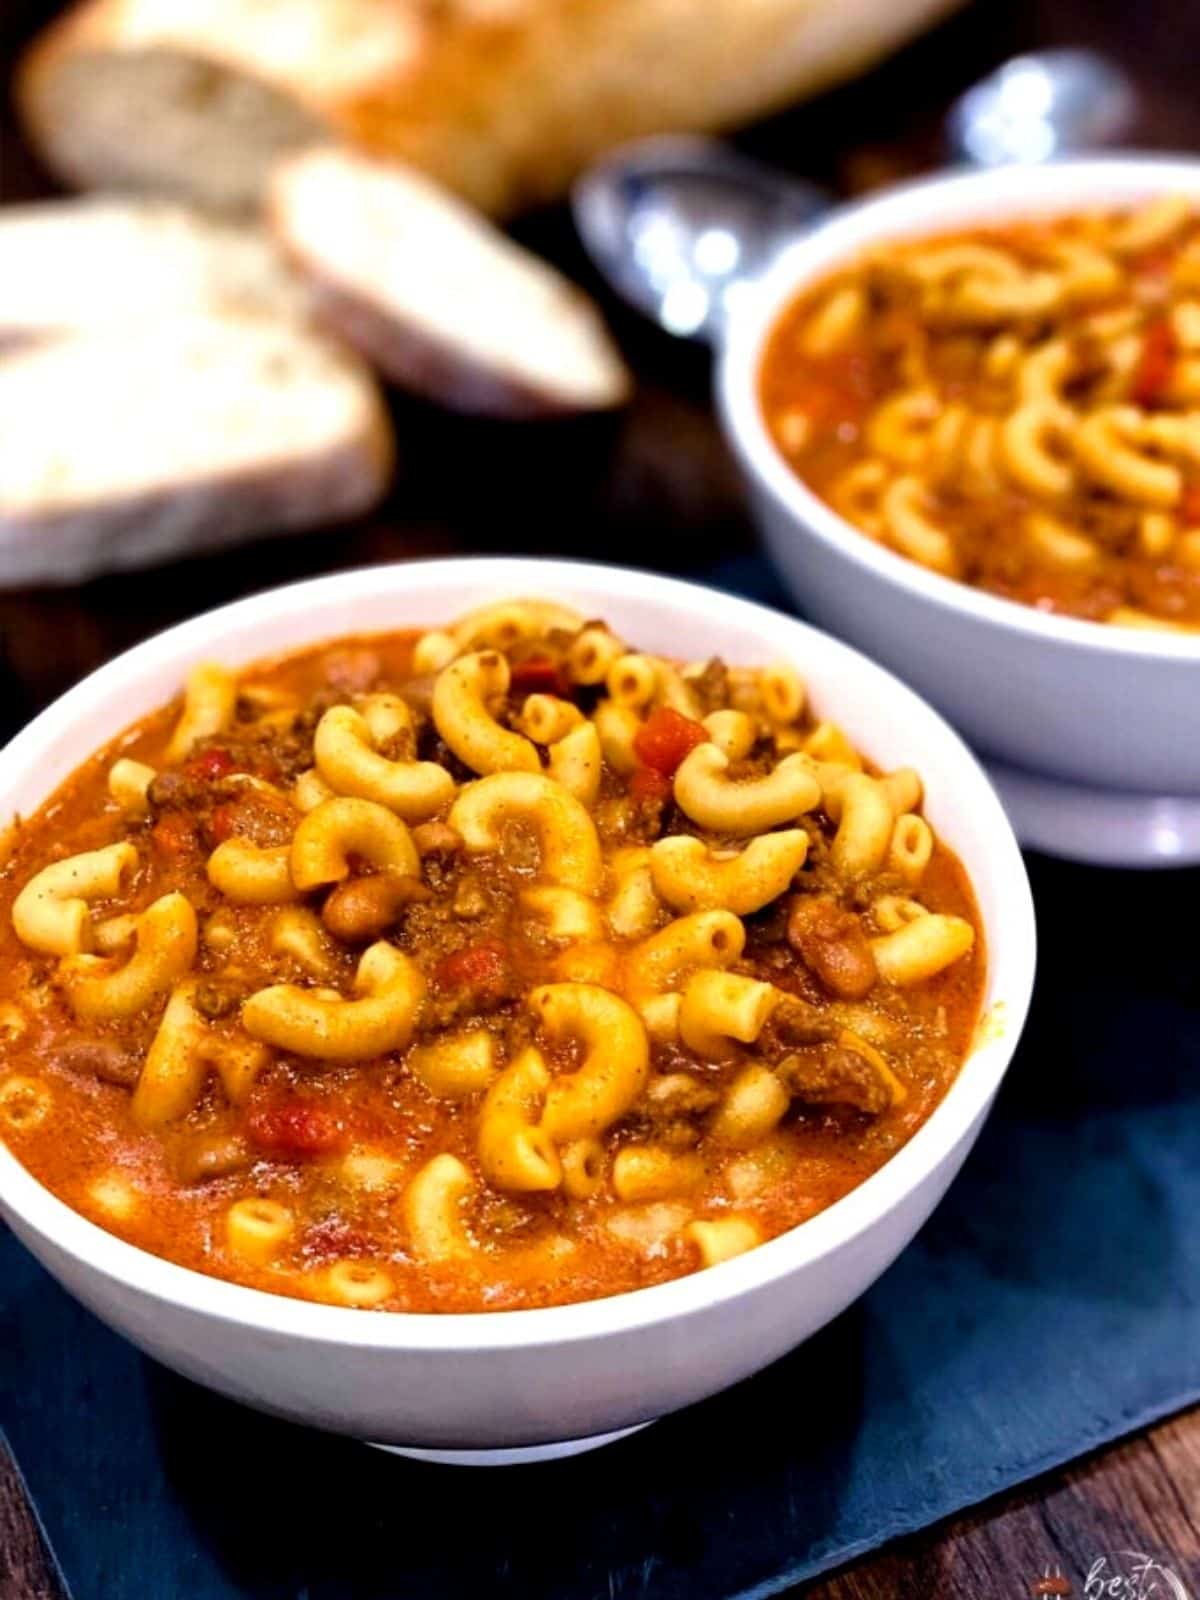 Chili mac and cheese in a white bowl.